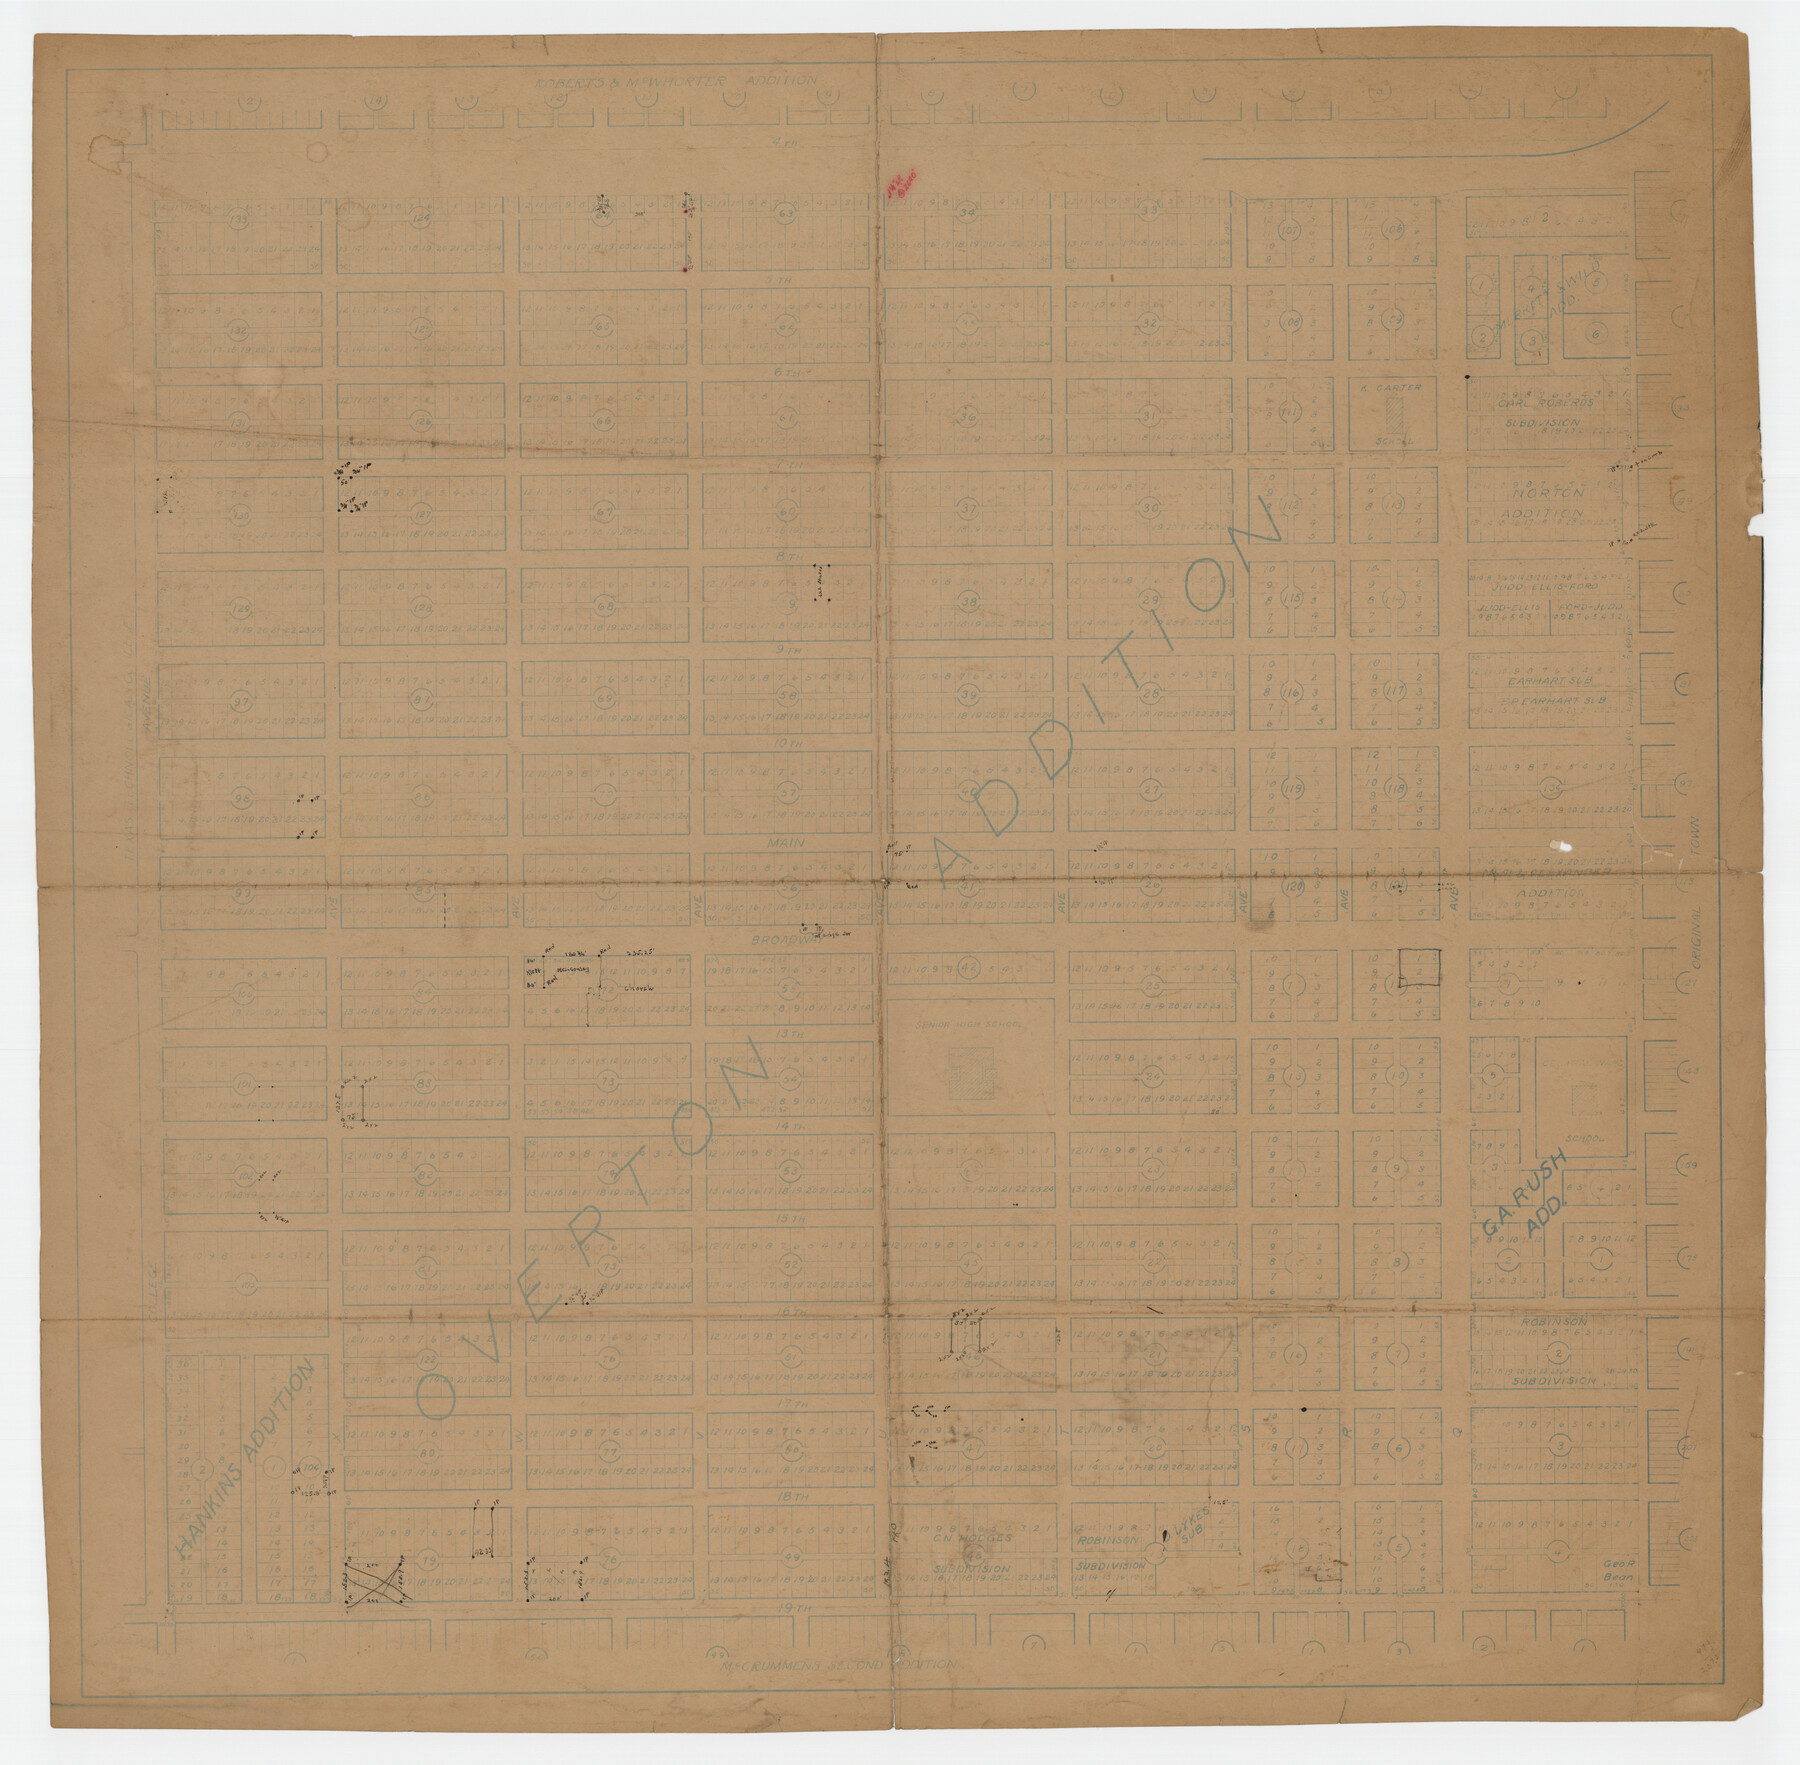 92812, [Plat map showing mostly Overton Addition], Twichell Survey Records